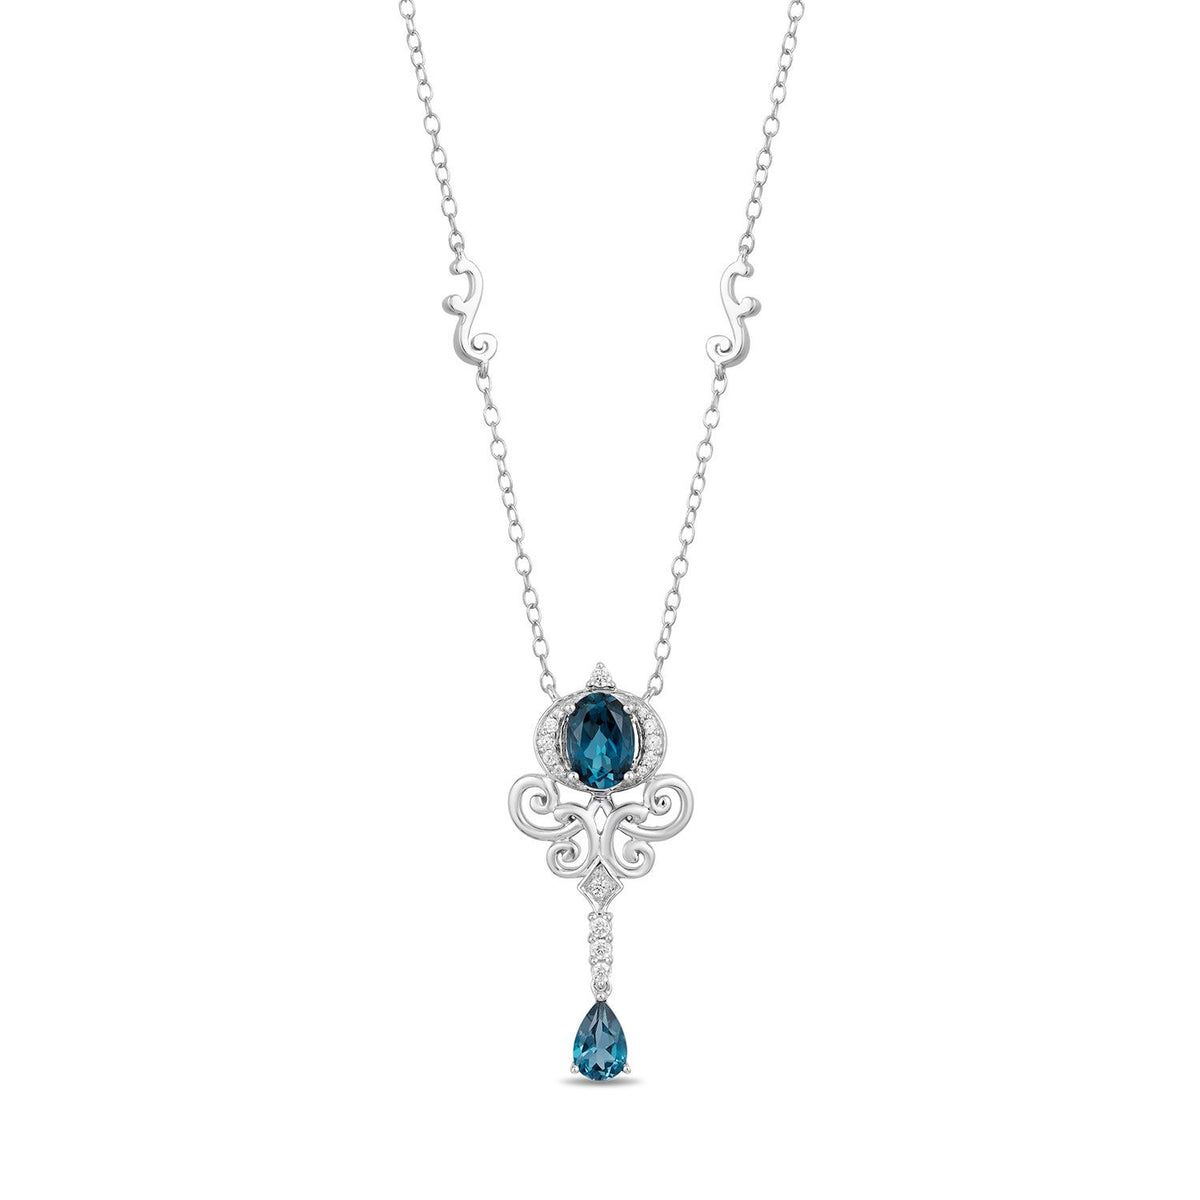 Stylish 925 Sterling Silver Necklace with Blues Stones – VOYLLA